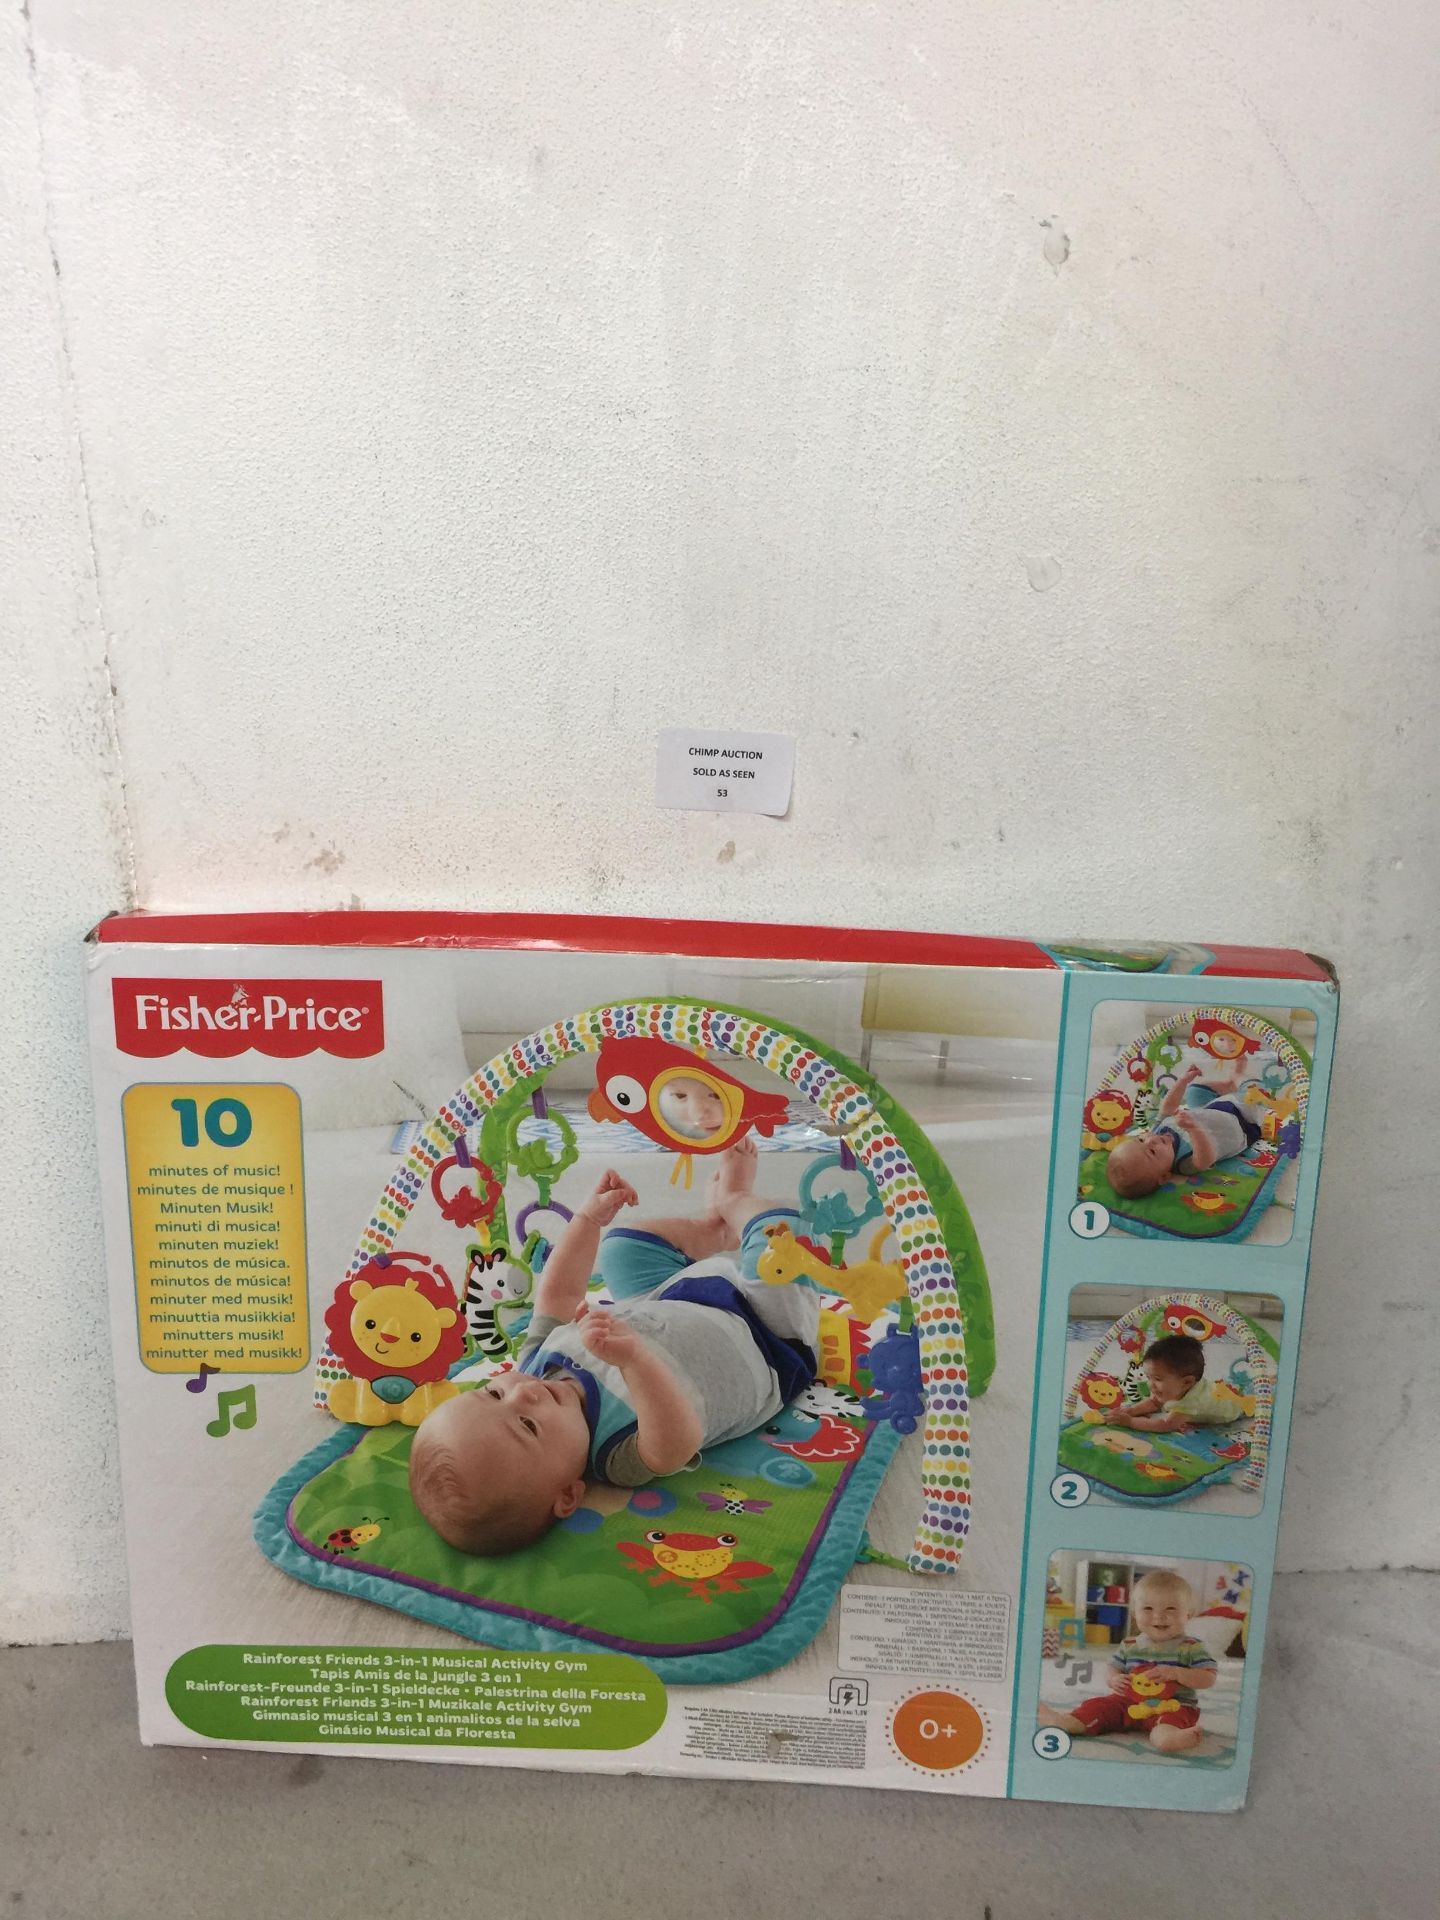 FISHER PRICE RAINFOREST FRIENDS 3 IN 1 MUSICAL ACTIVITY GYM